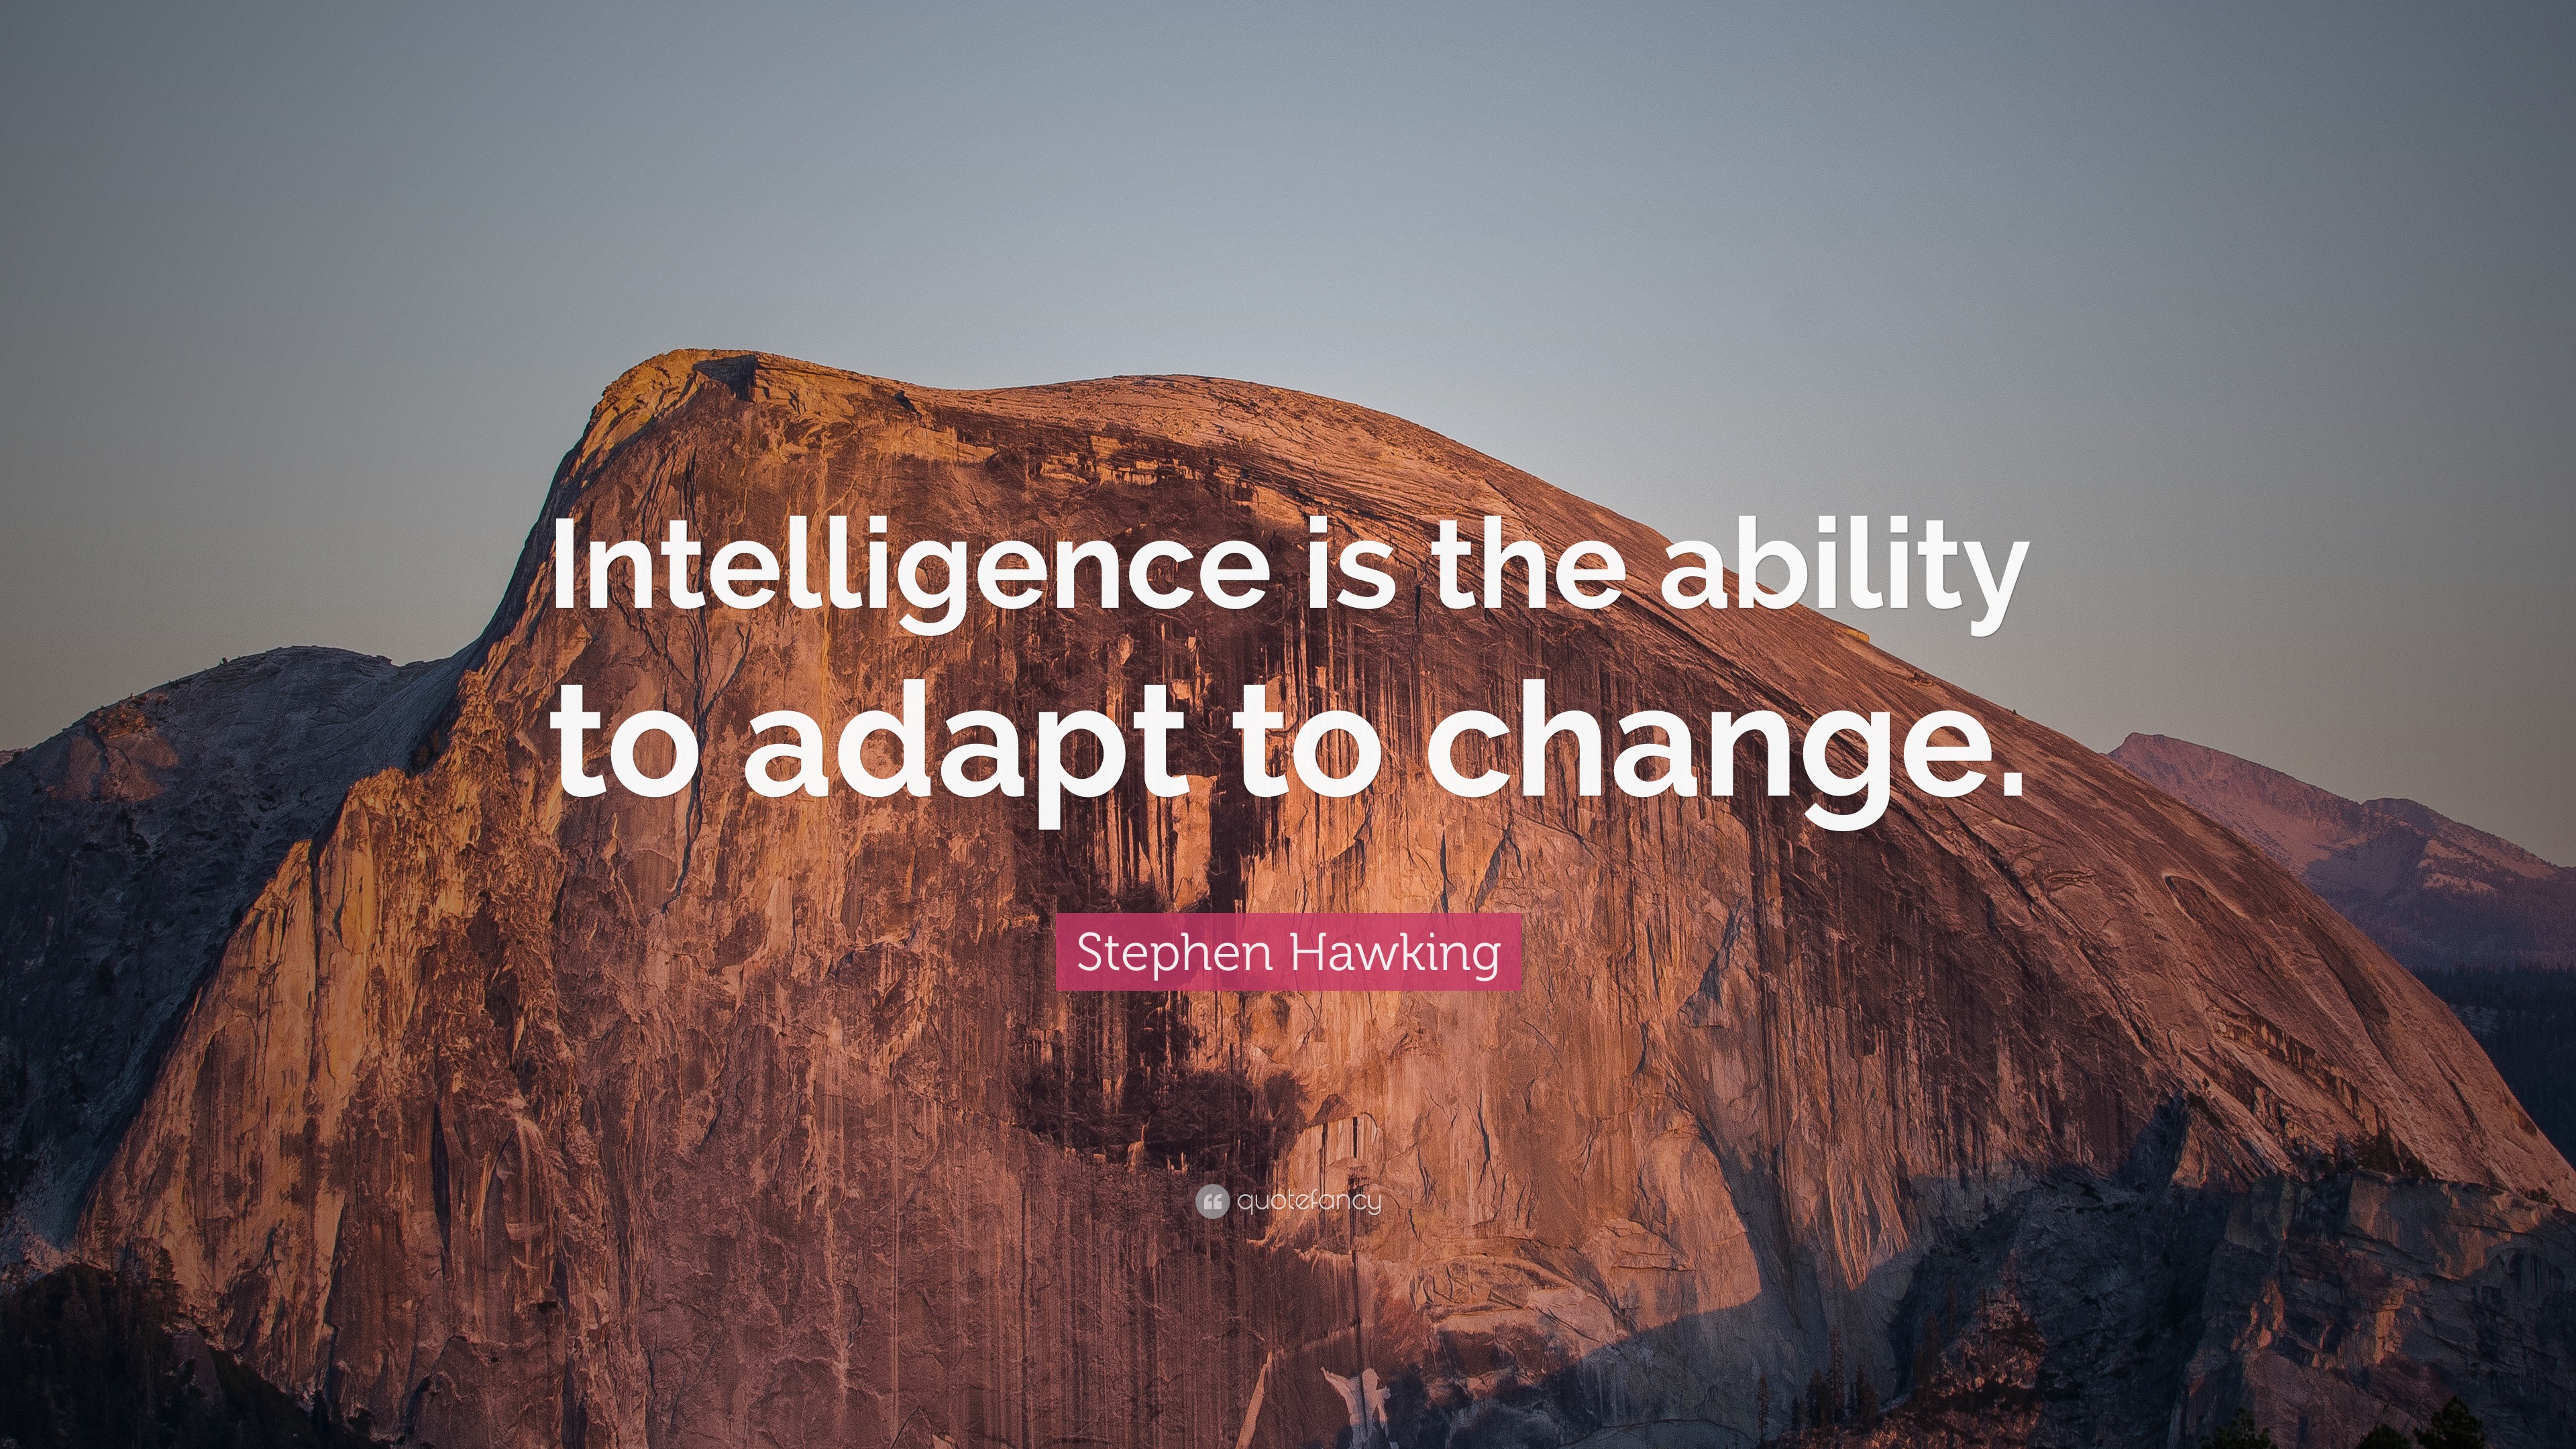 Stephen Hawking Quote: “Intelligence is the ability to adapt to change.